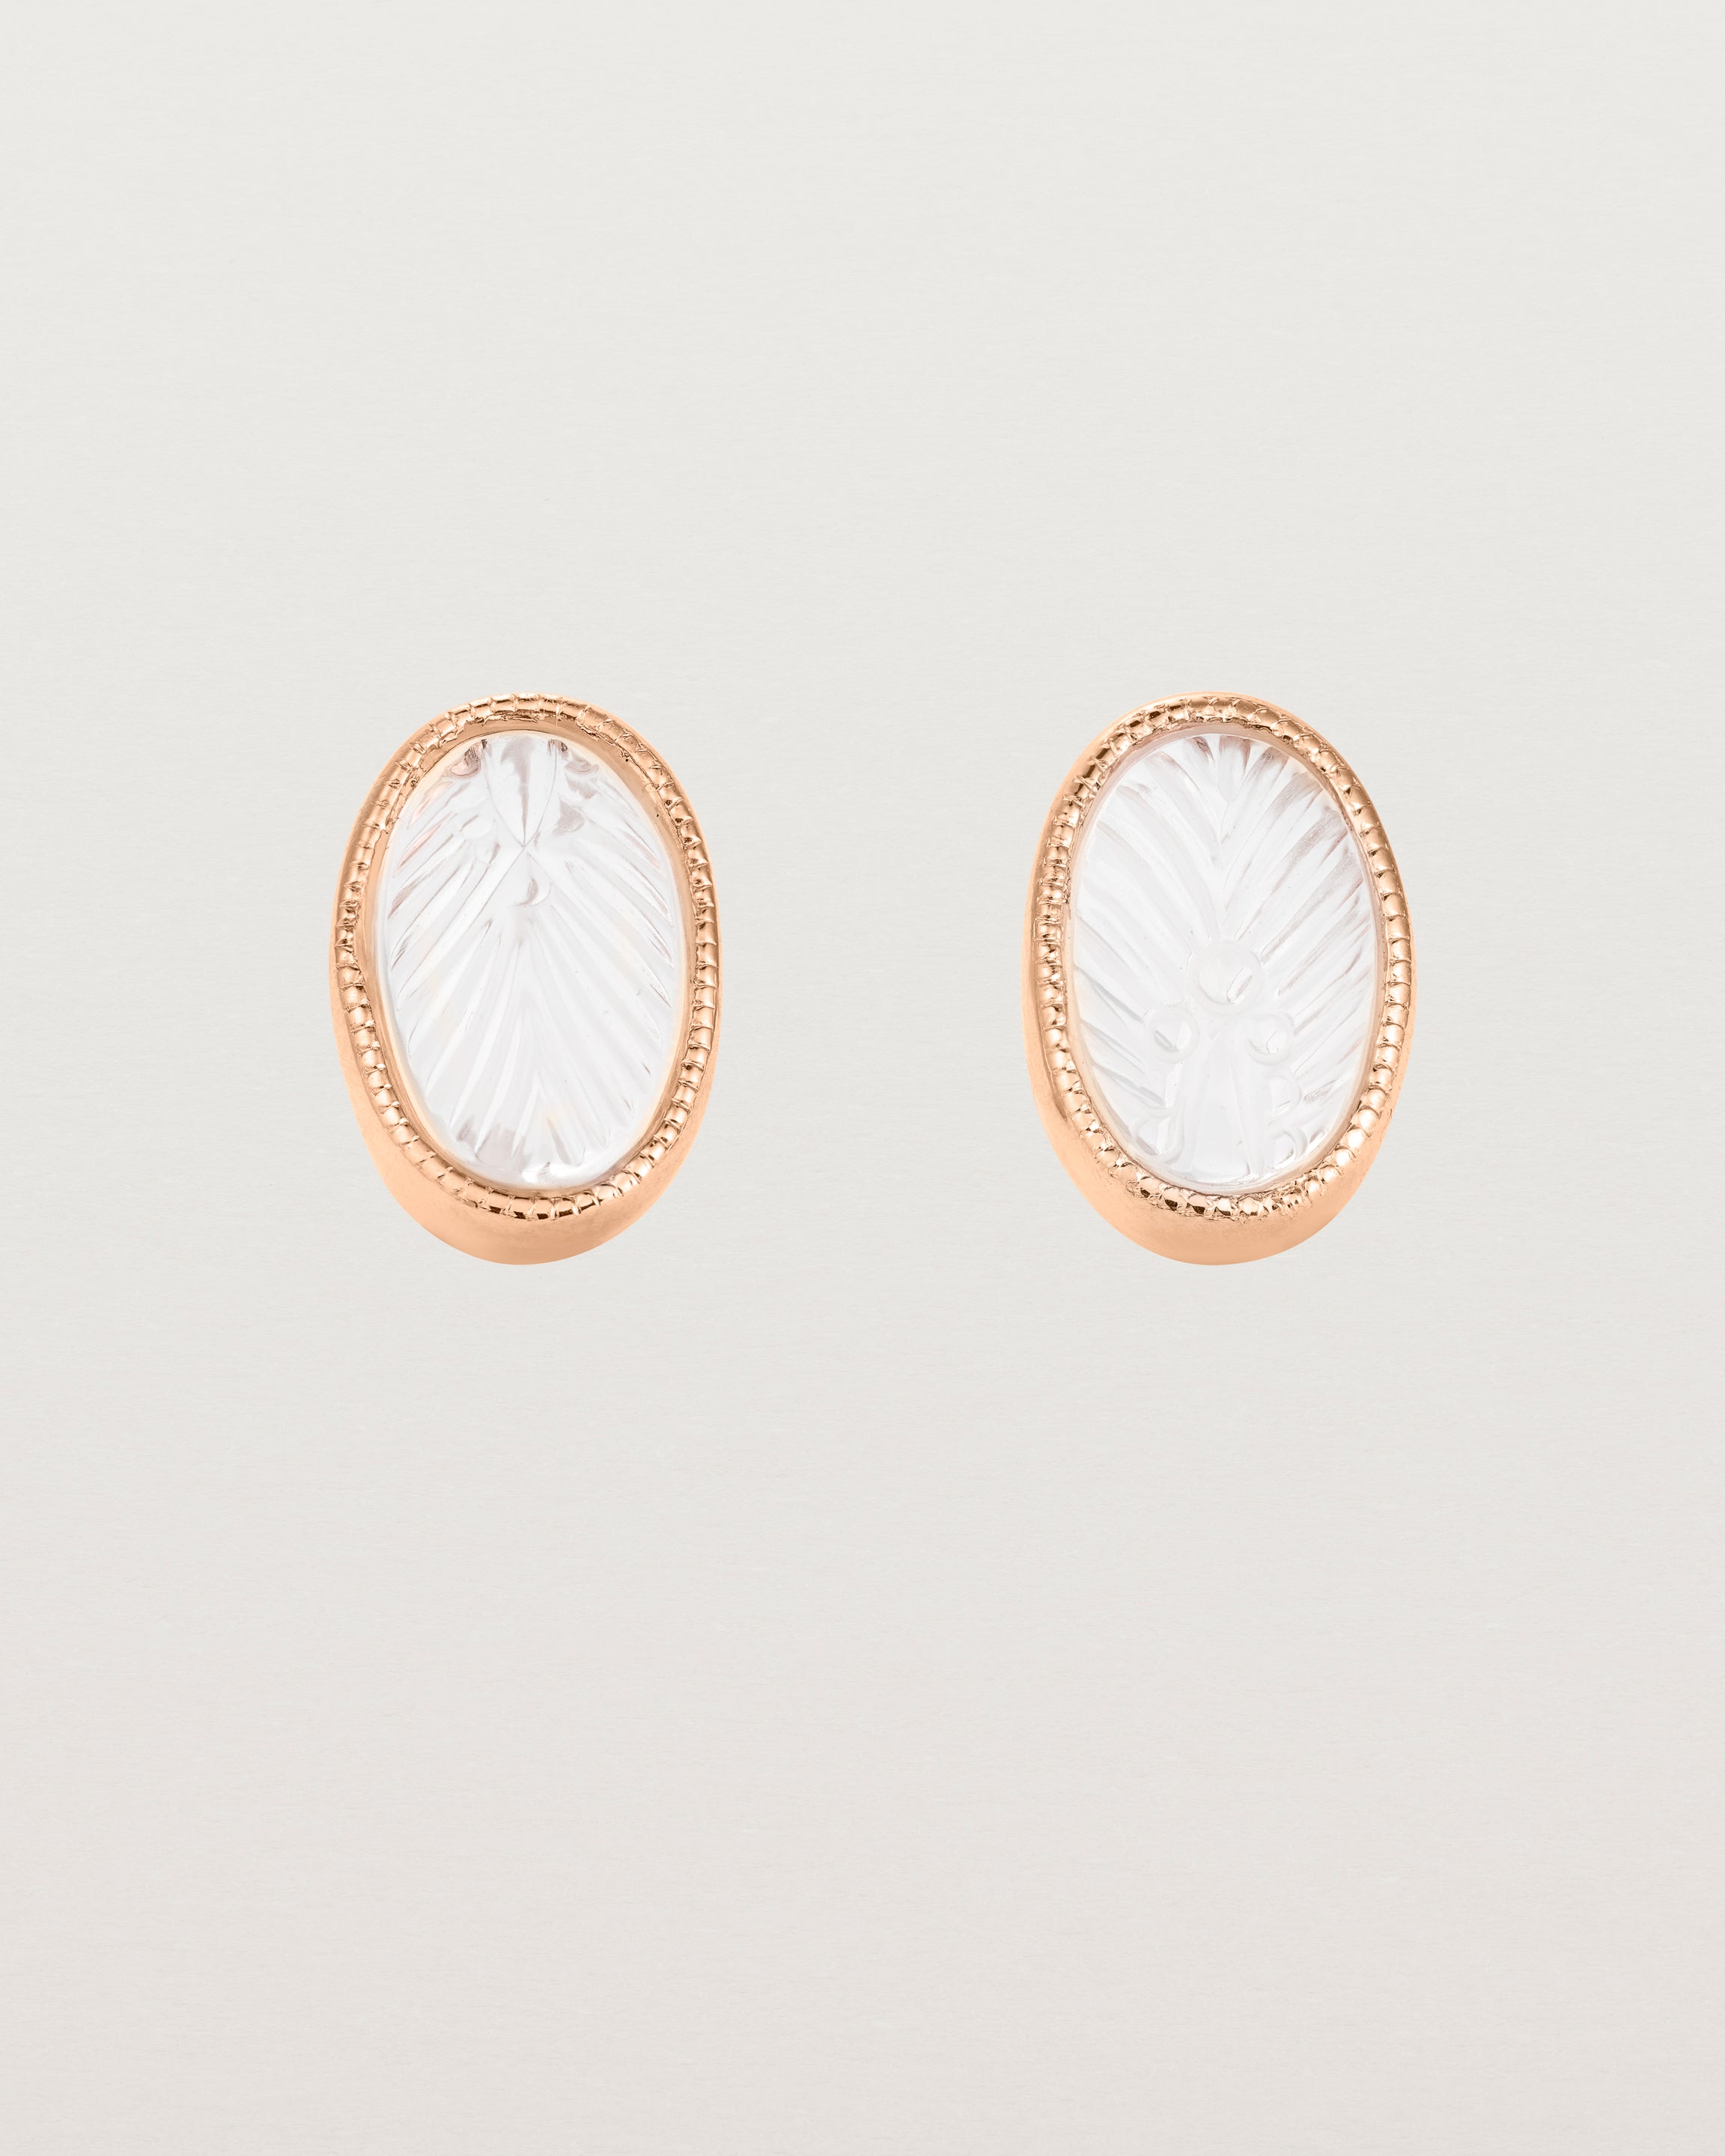 A pair of large oval rose gold studs featuring carved quartz